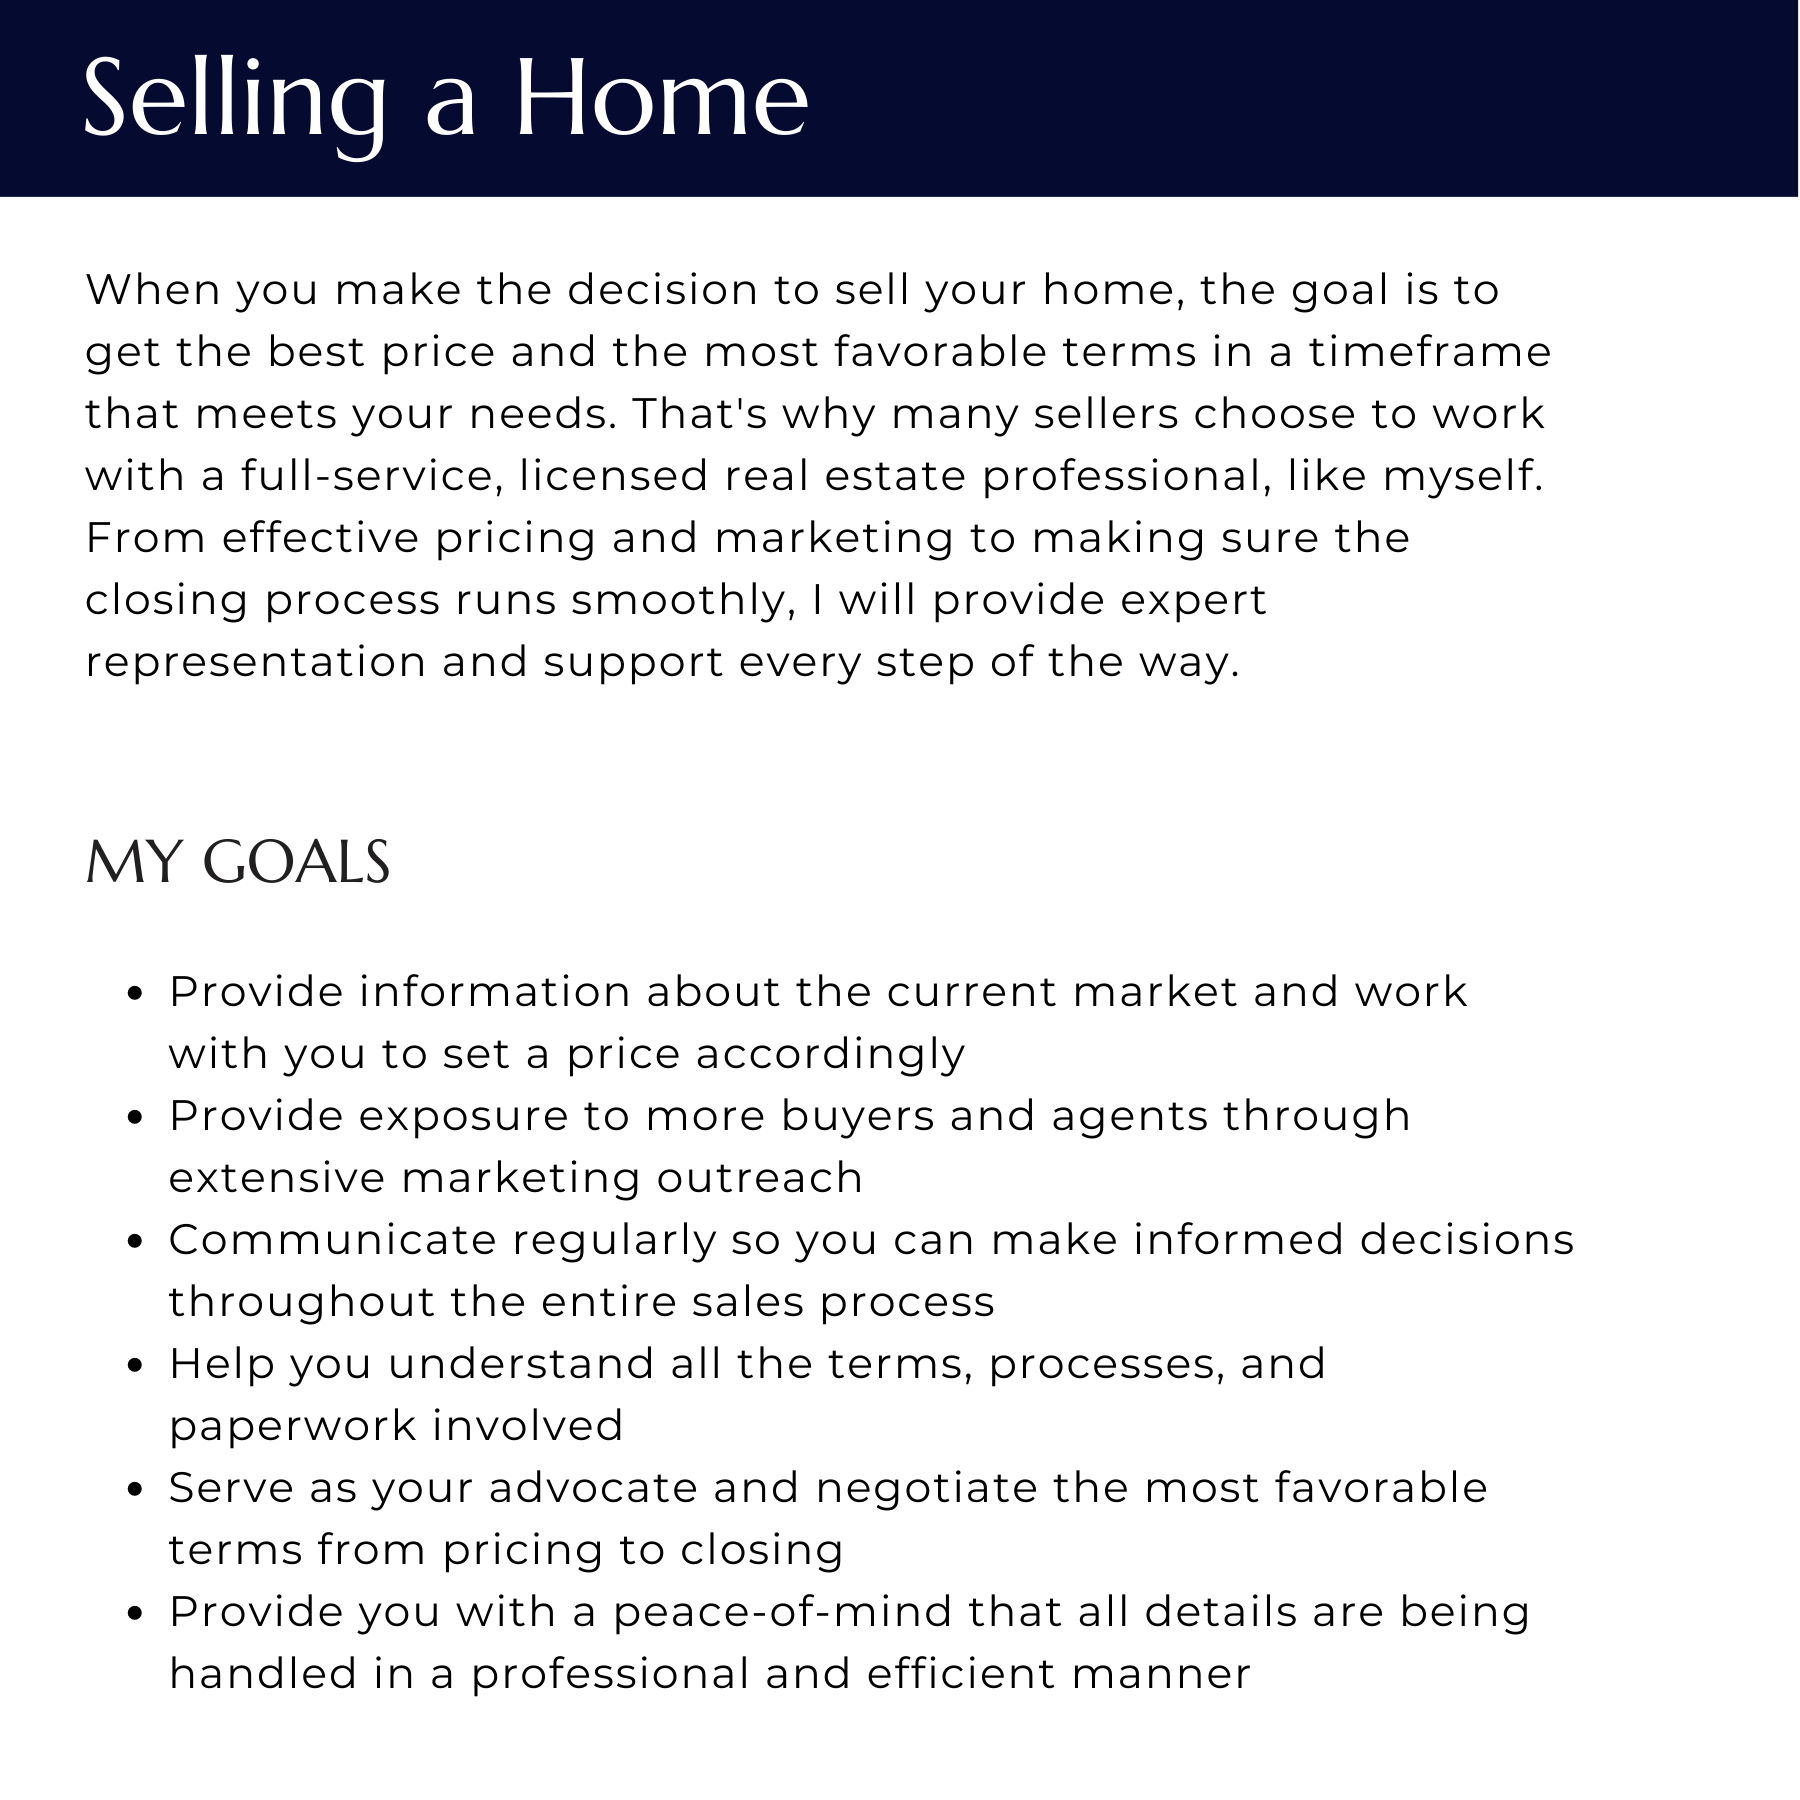 Selling a Home